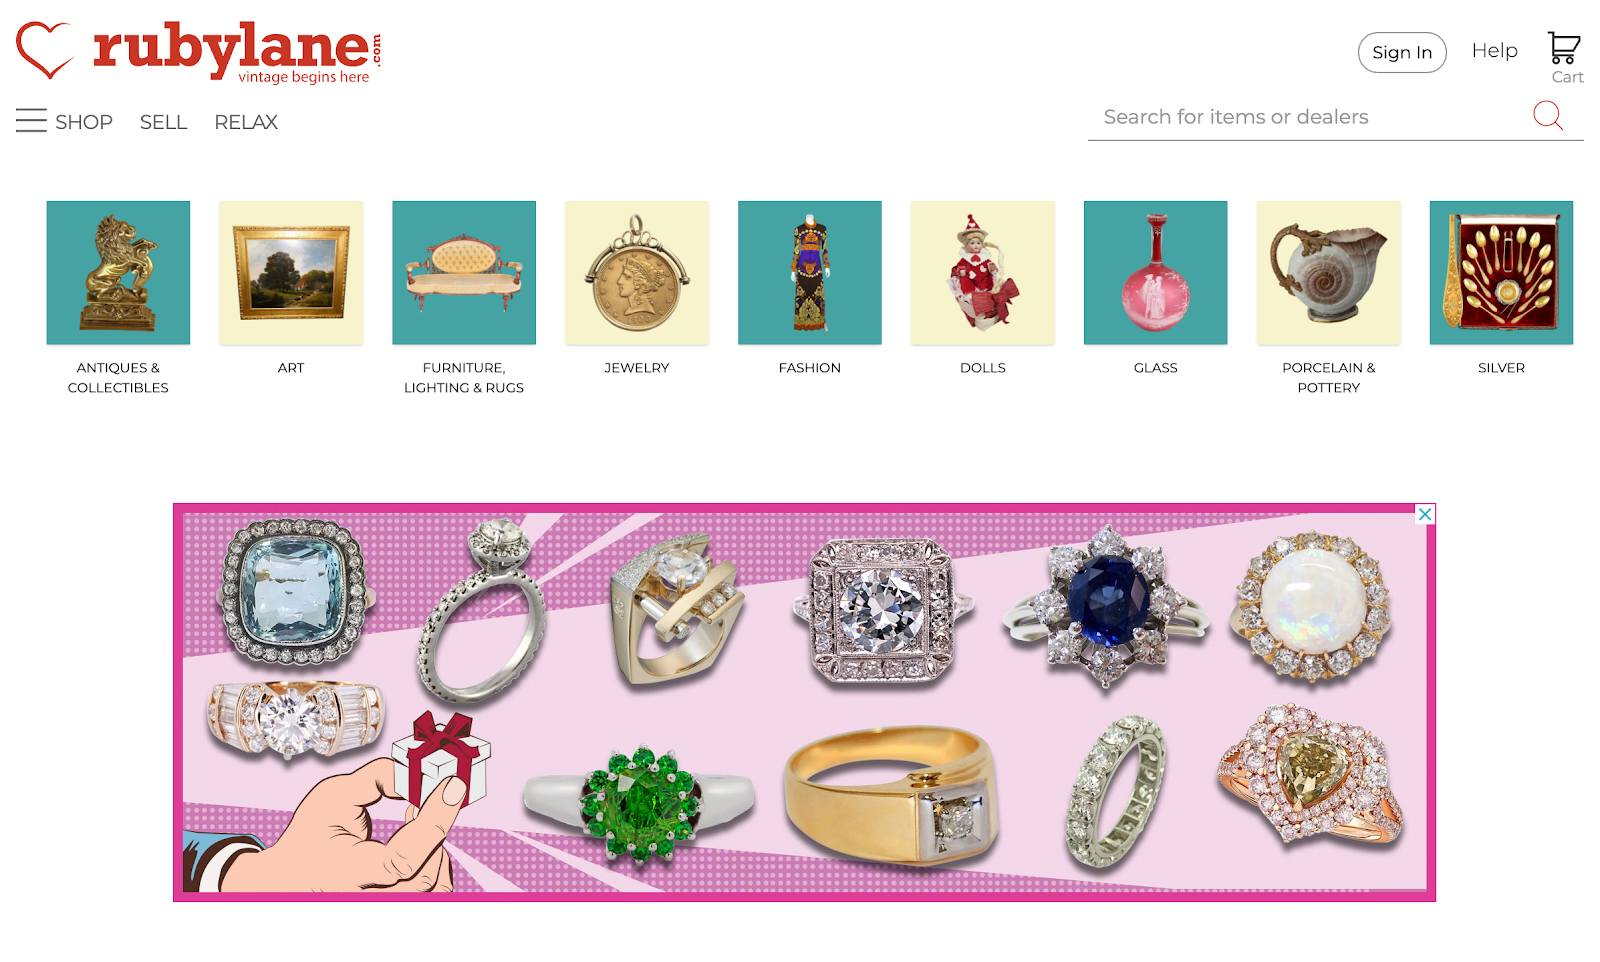 Diamond rings on a pink background. A carousel of antiques categories like art, furniture, and glass.